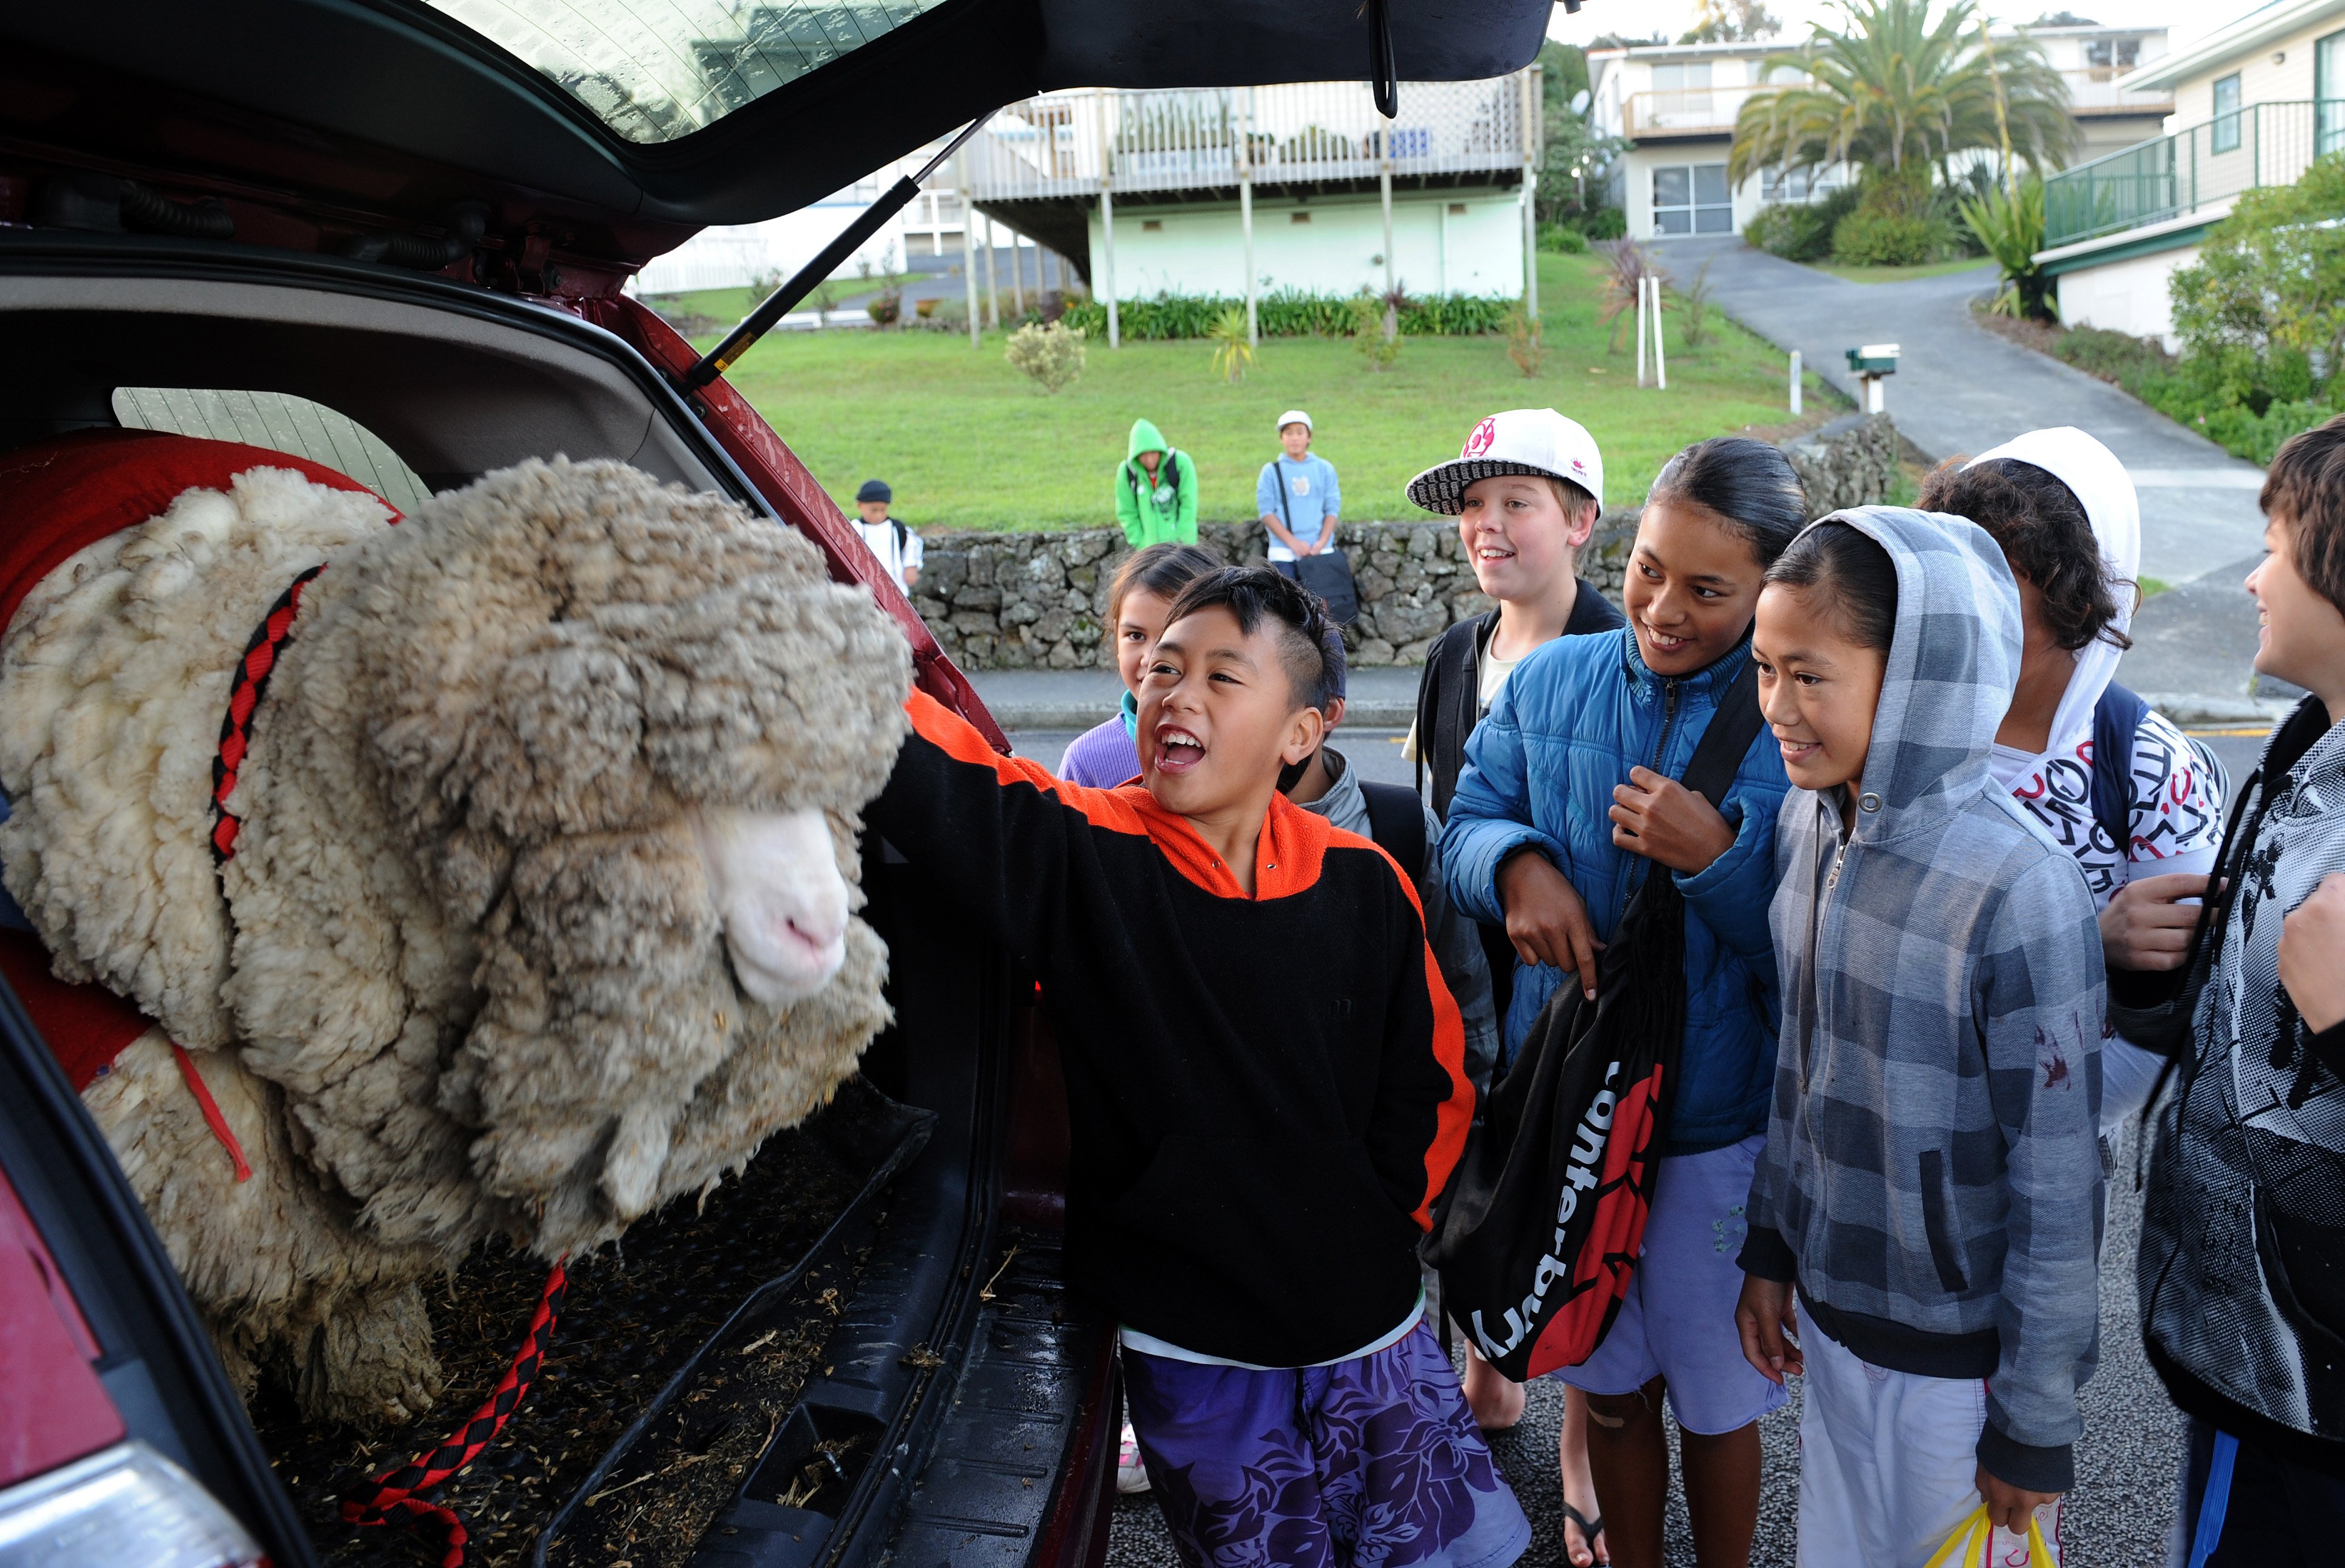 Delighted Paihia children knew exactly who the sheep in the back of the rental car was.